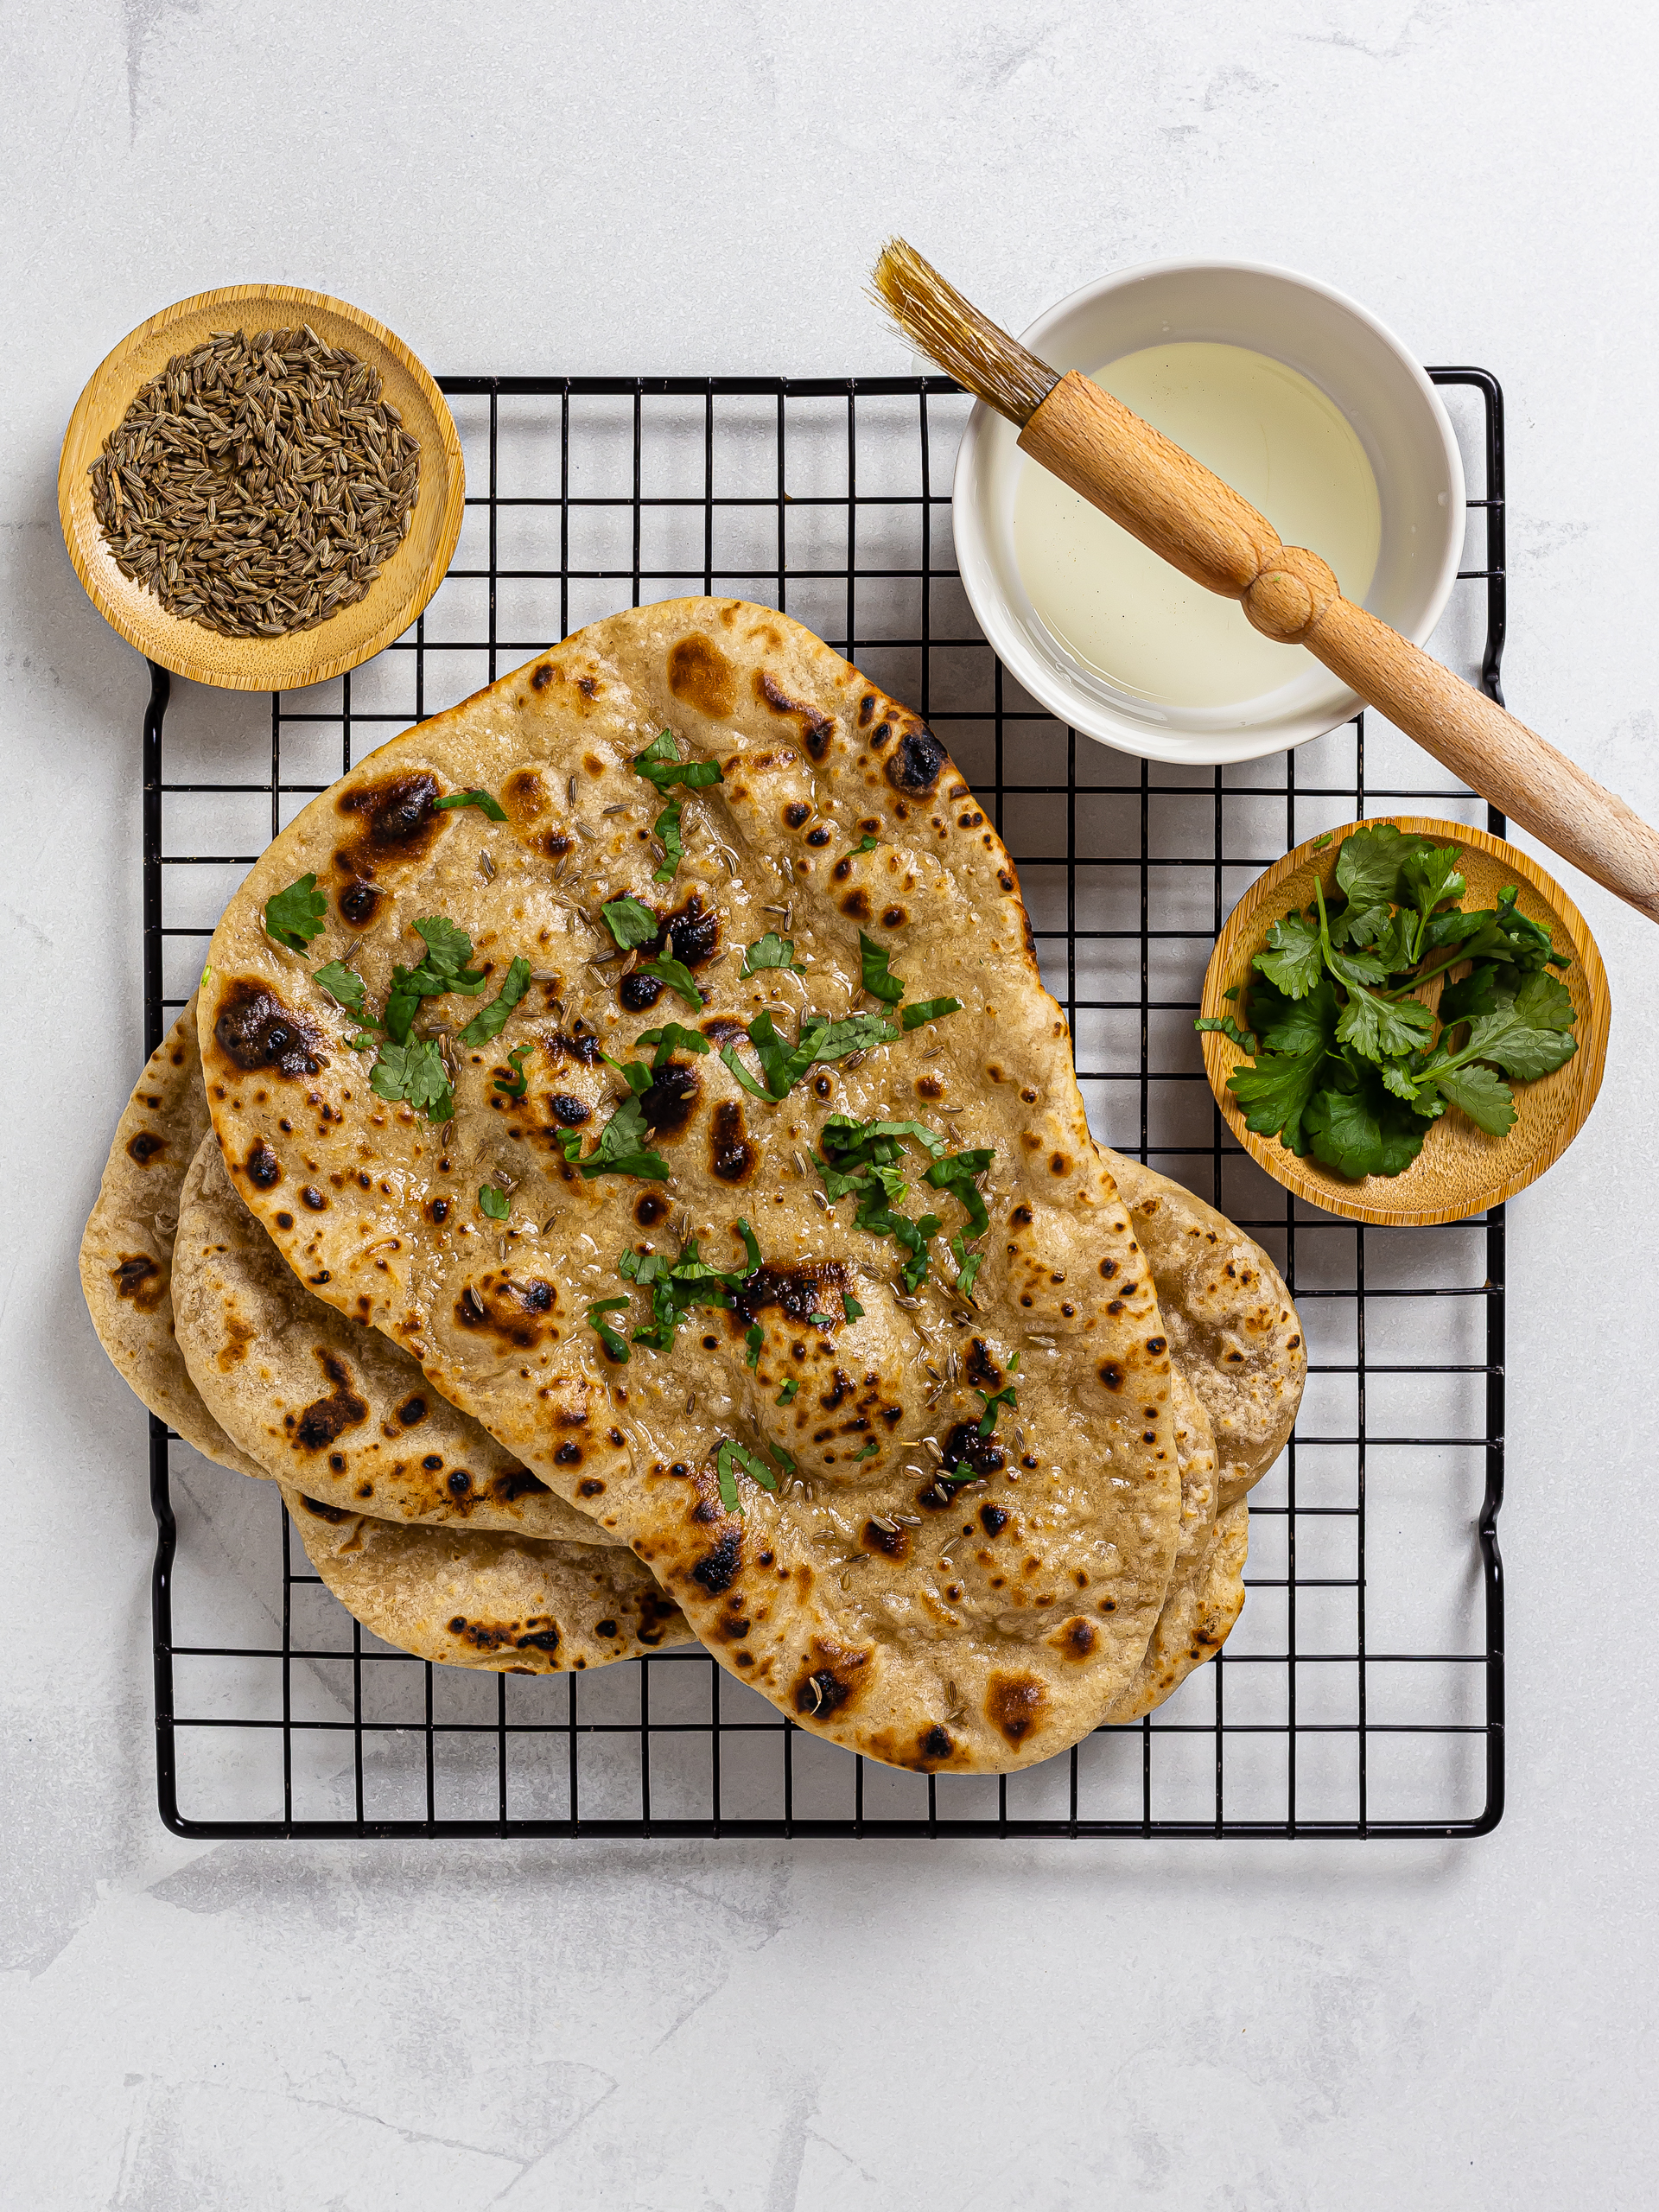 sourdough naan bread brushed with oil